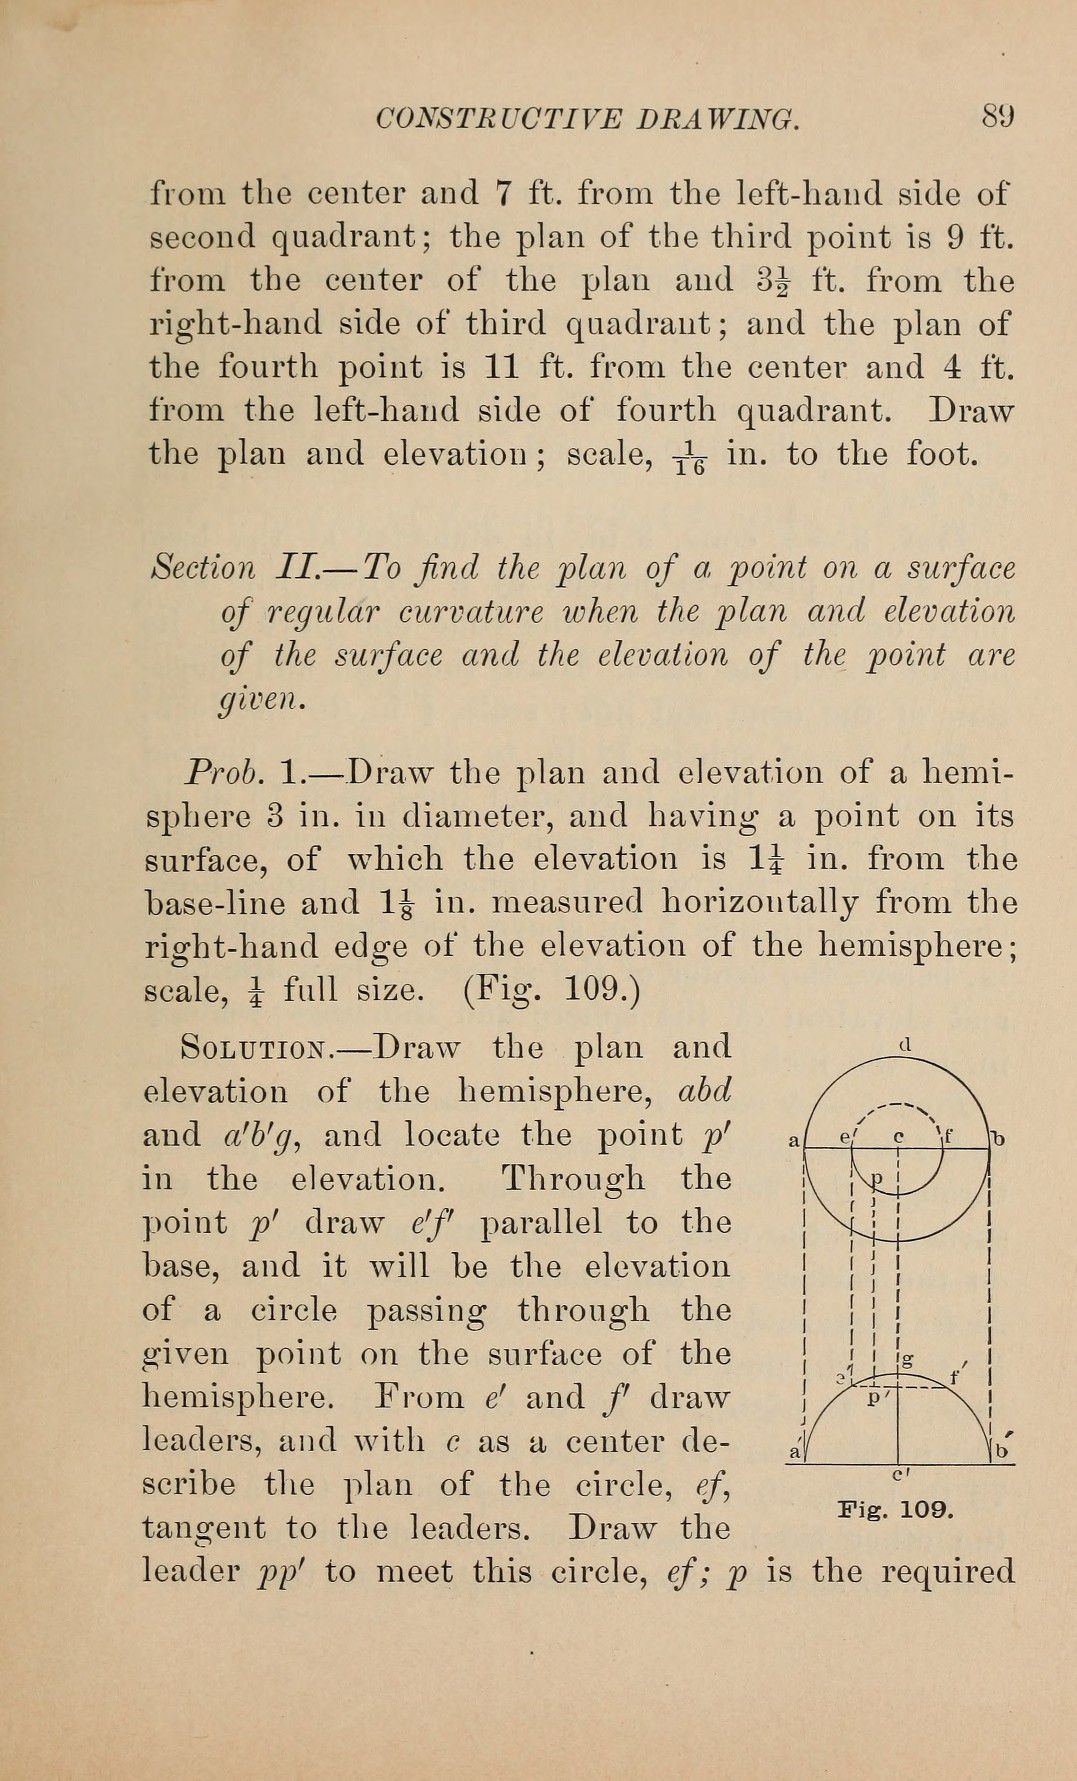 [Frank Aborn] Elementary mechanical drawing, for school and shop [English] 94